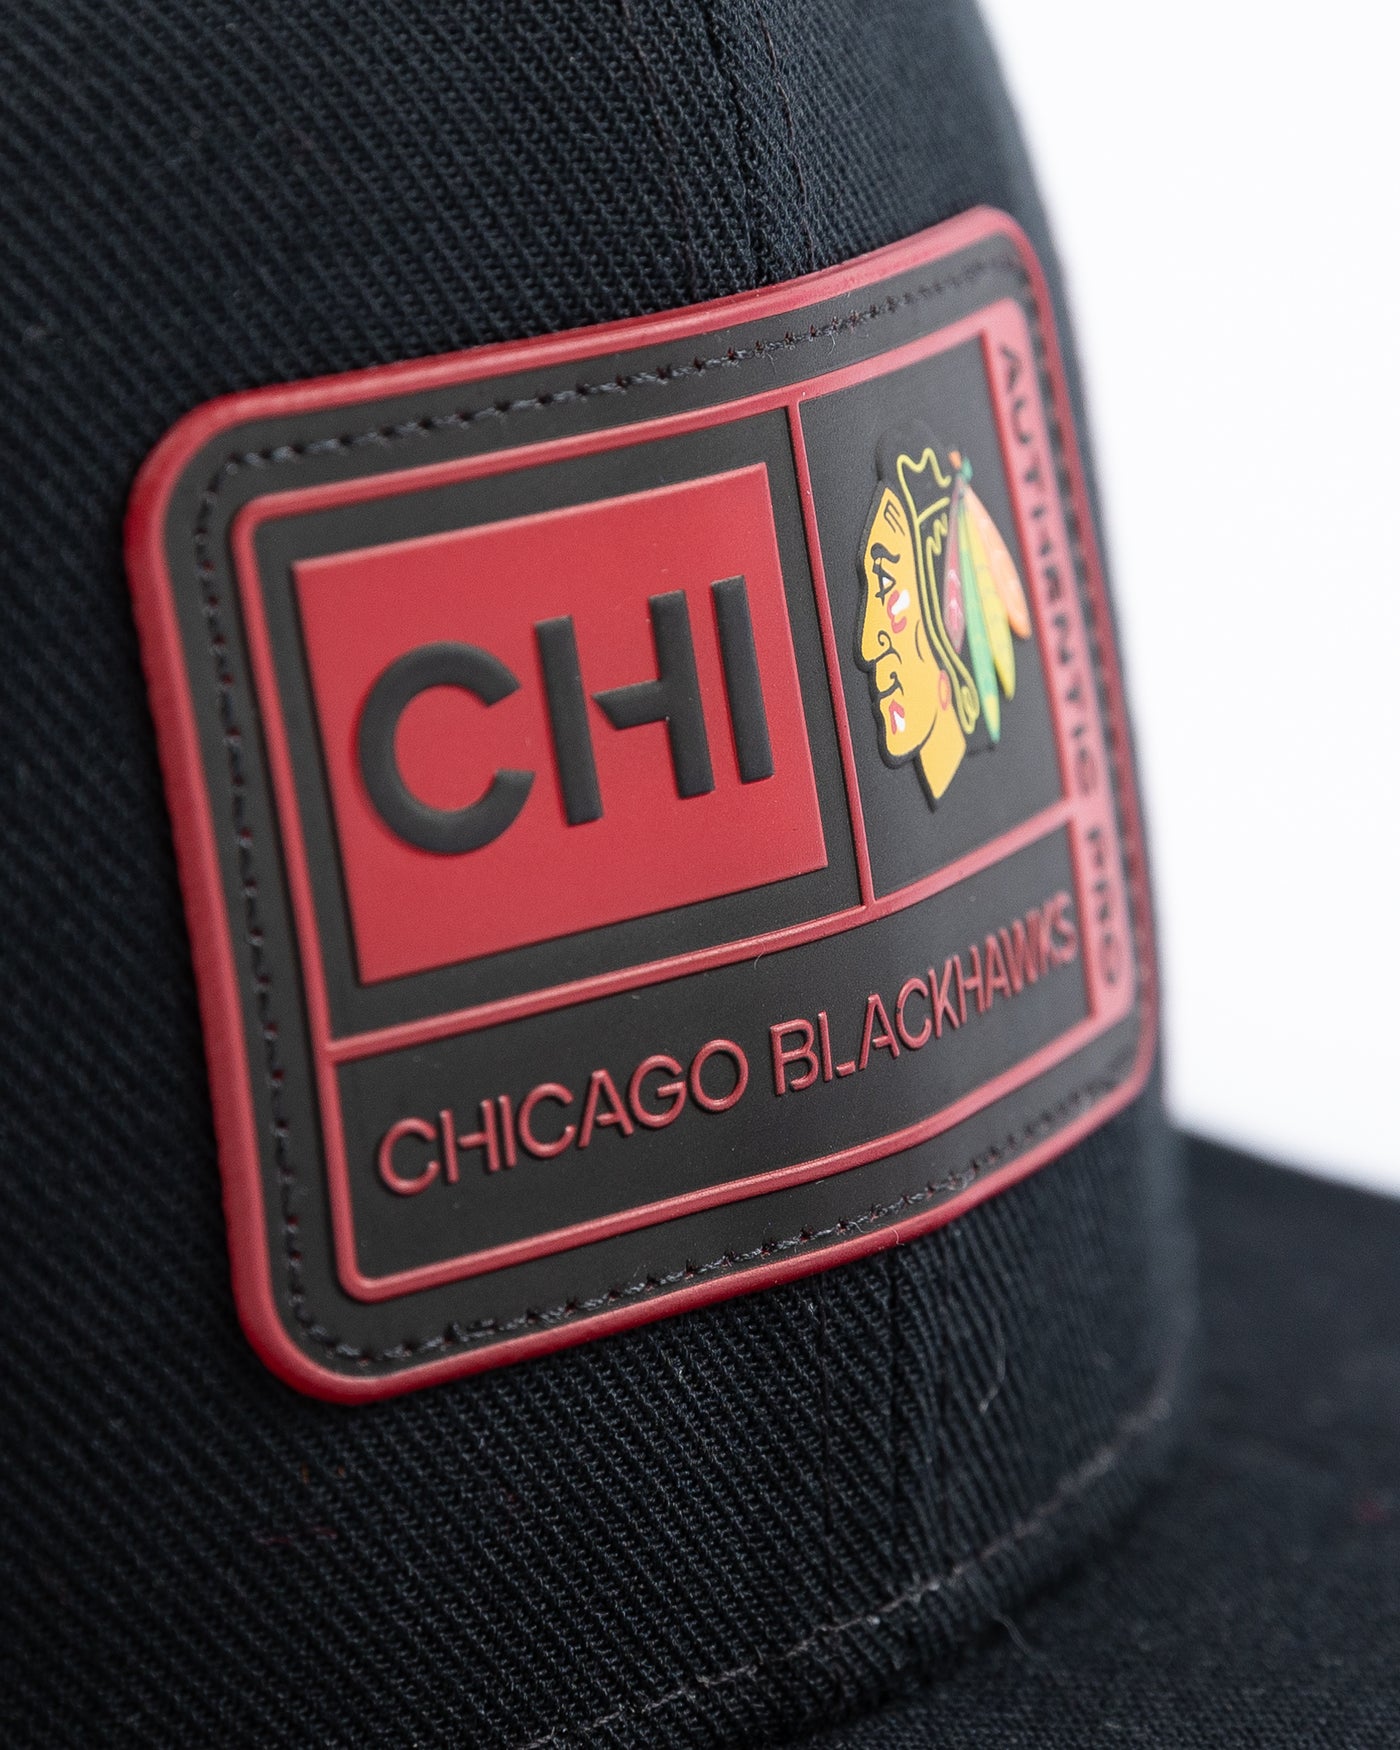 black Fanatics Authentic Pro snapback with Chicago Blackhawks rubberized patch on front - detail lay flat